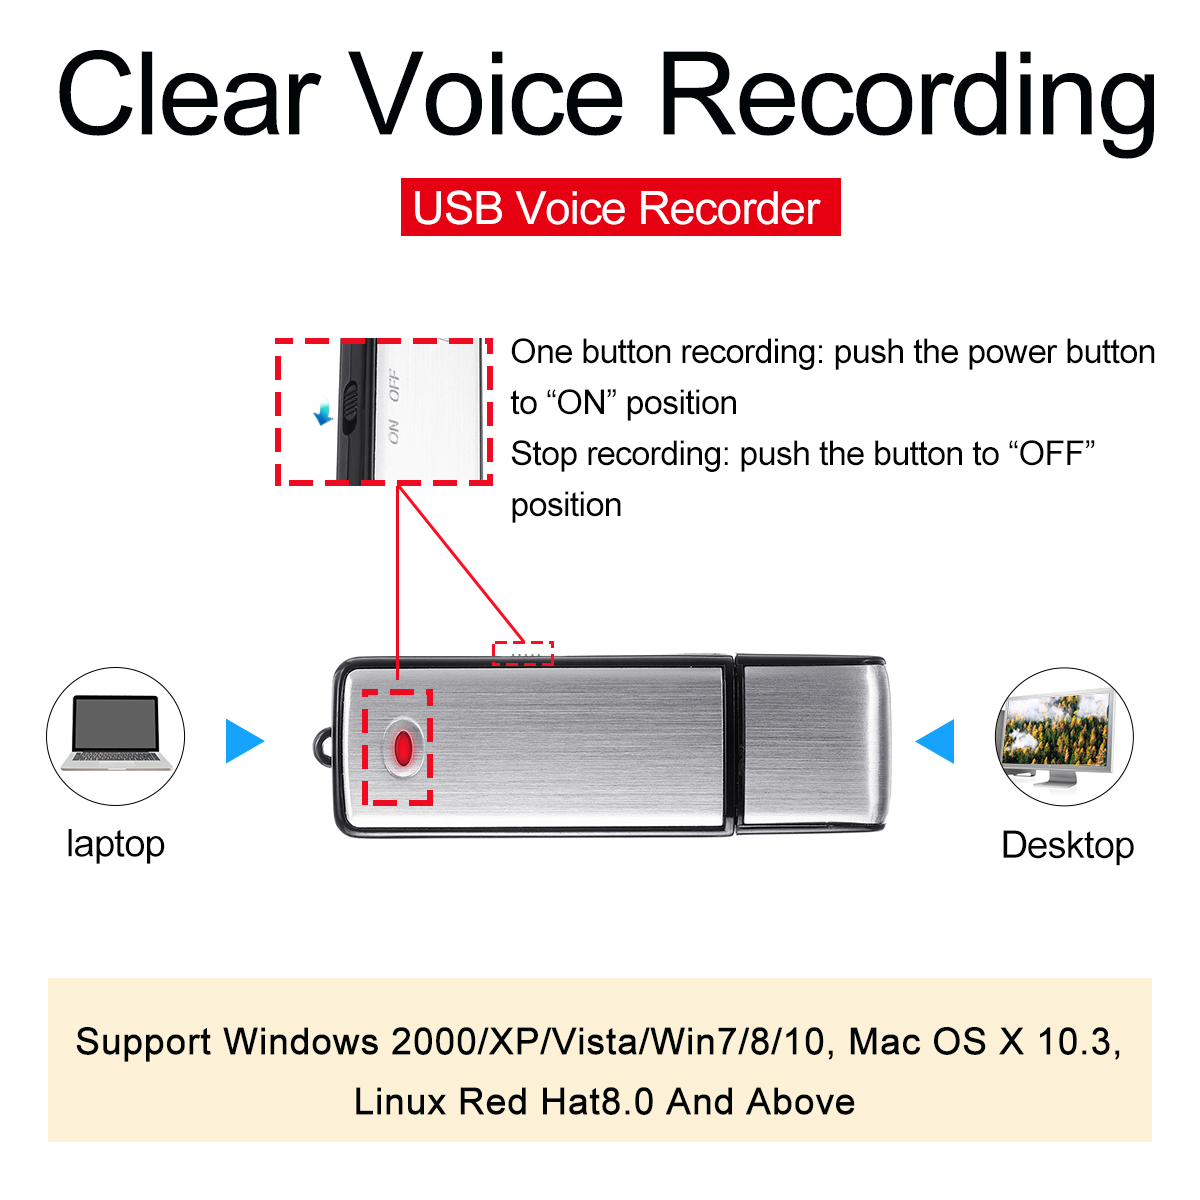 8GB-16GB-Voice-Recorder-USB-20-Flash-Drive-U-Disk-For-Laptop-Notebook-PC-1492824